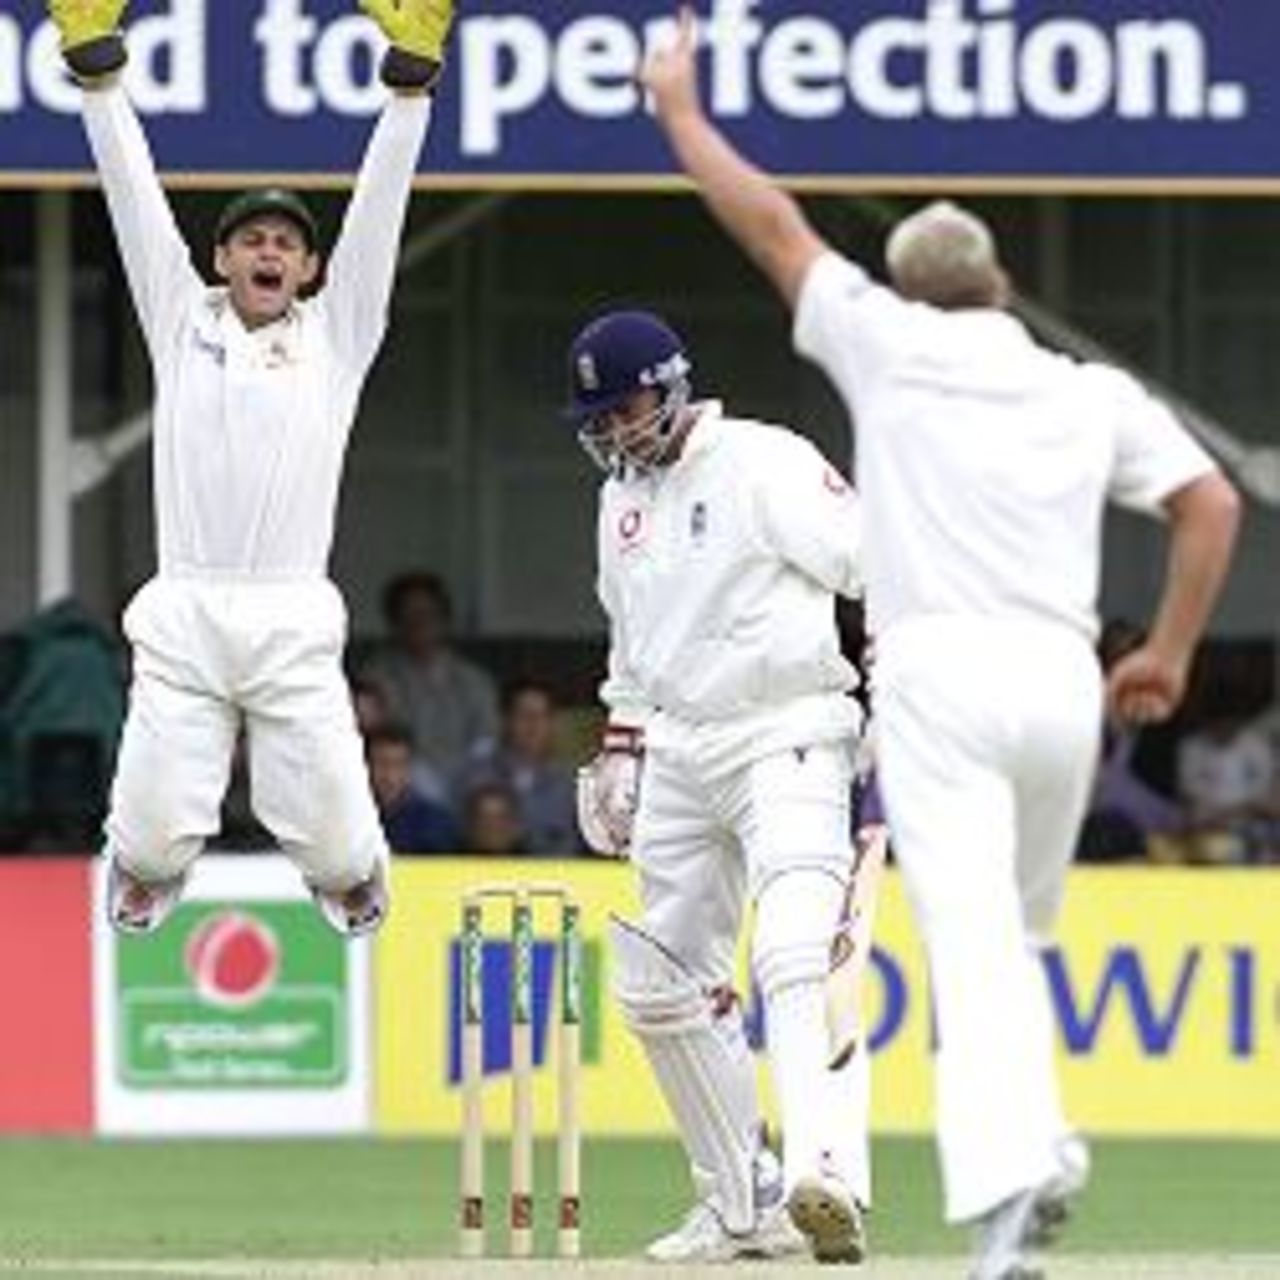 Shane Warne of Australia celebrates the wicket of Ashley Giles of England during the 4th day of the npower Ashes first test match between England v Australia at Edgbaston, Birmingham.